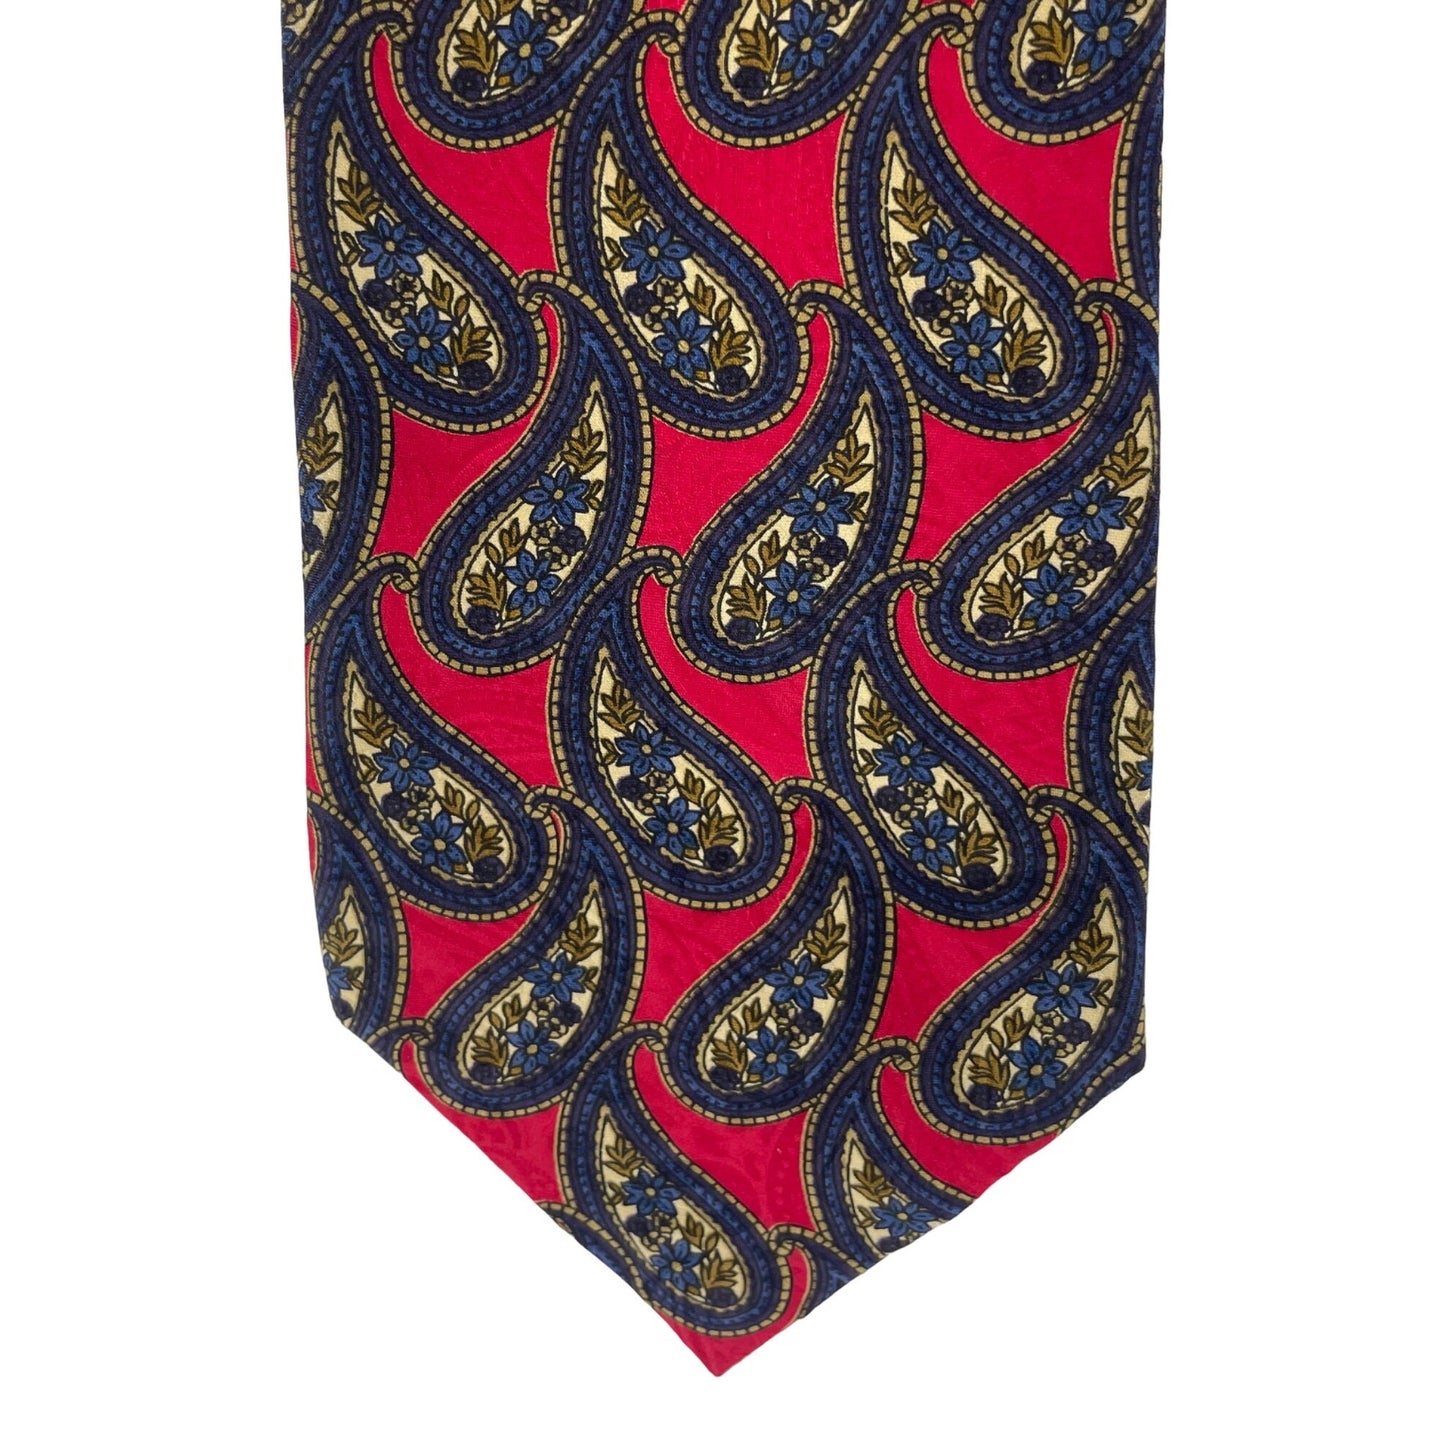 Isaco Men's Red Silk Dress Tie With Tan/Olive/Navy Paisley Print